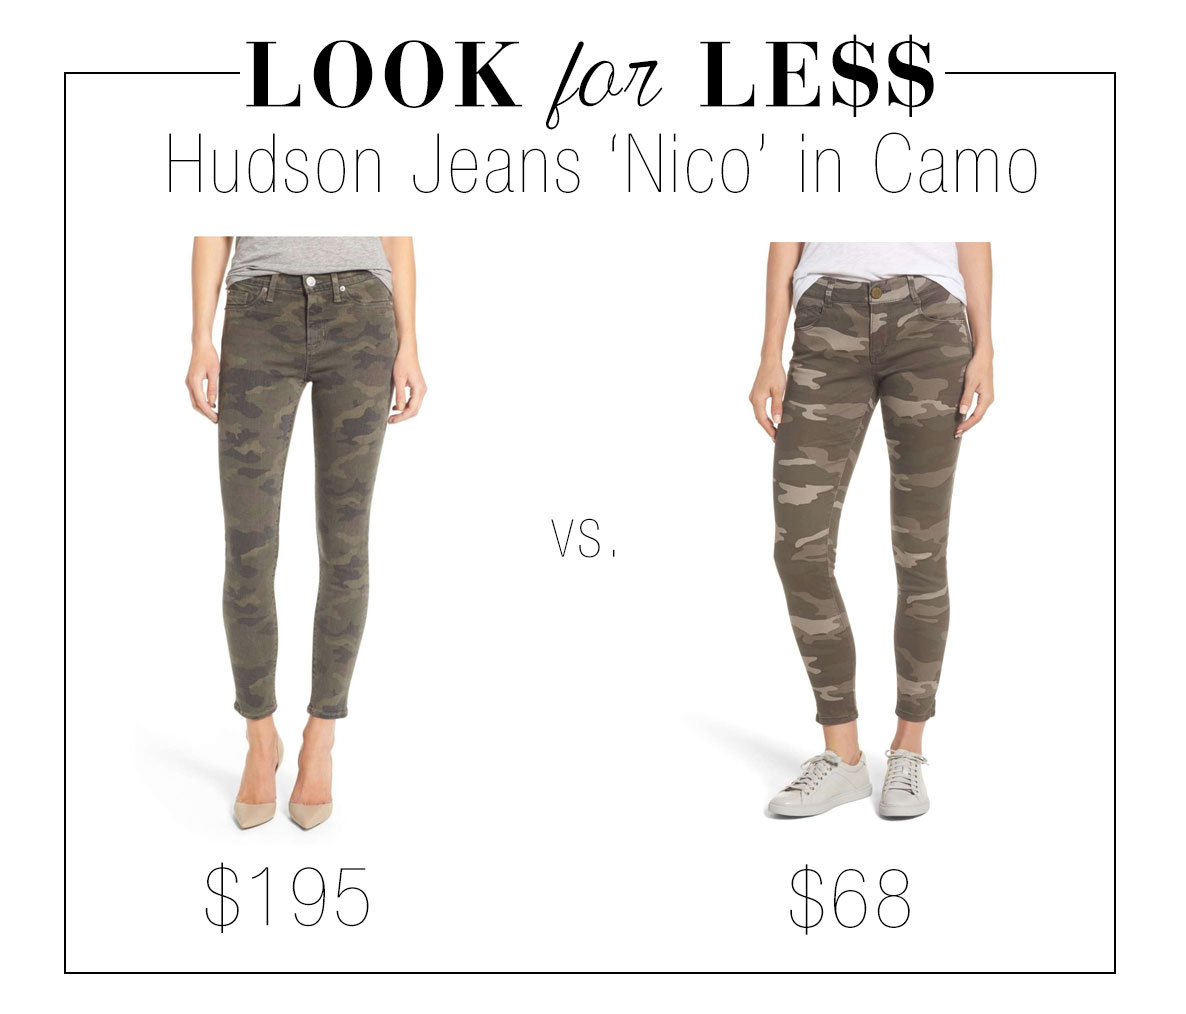 Get the look of Hudson Jeans 'Nico' camo skinny jeans for less.